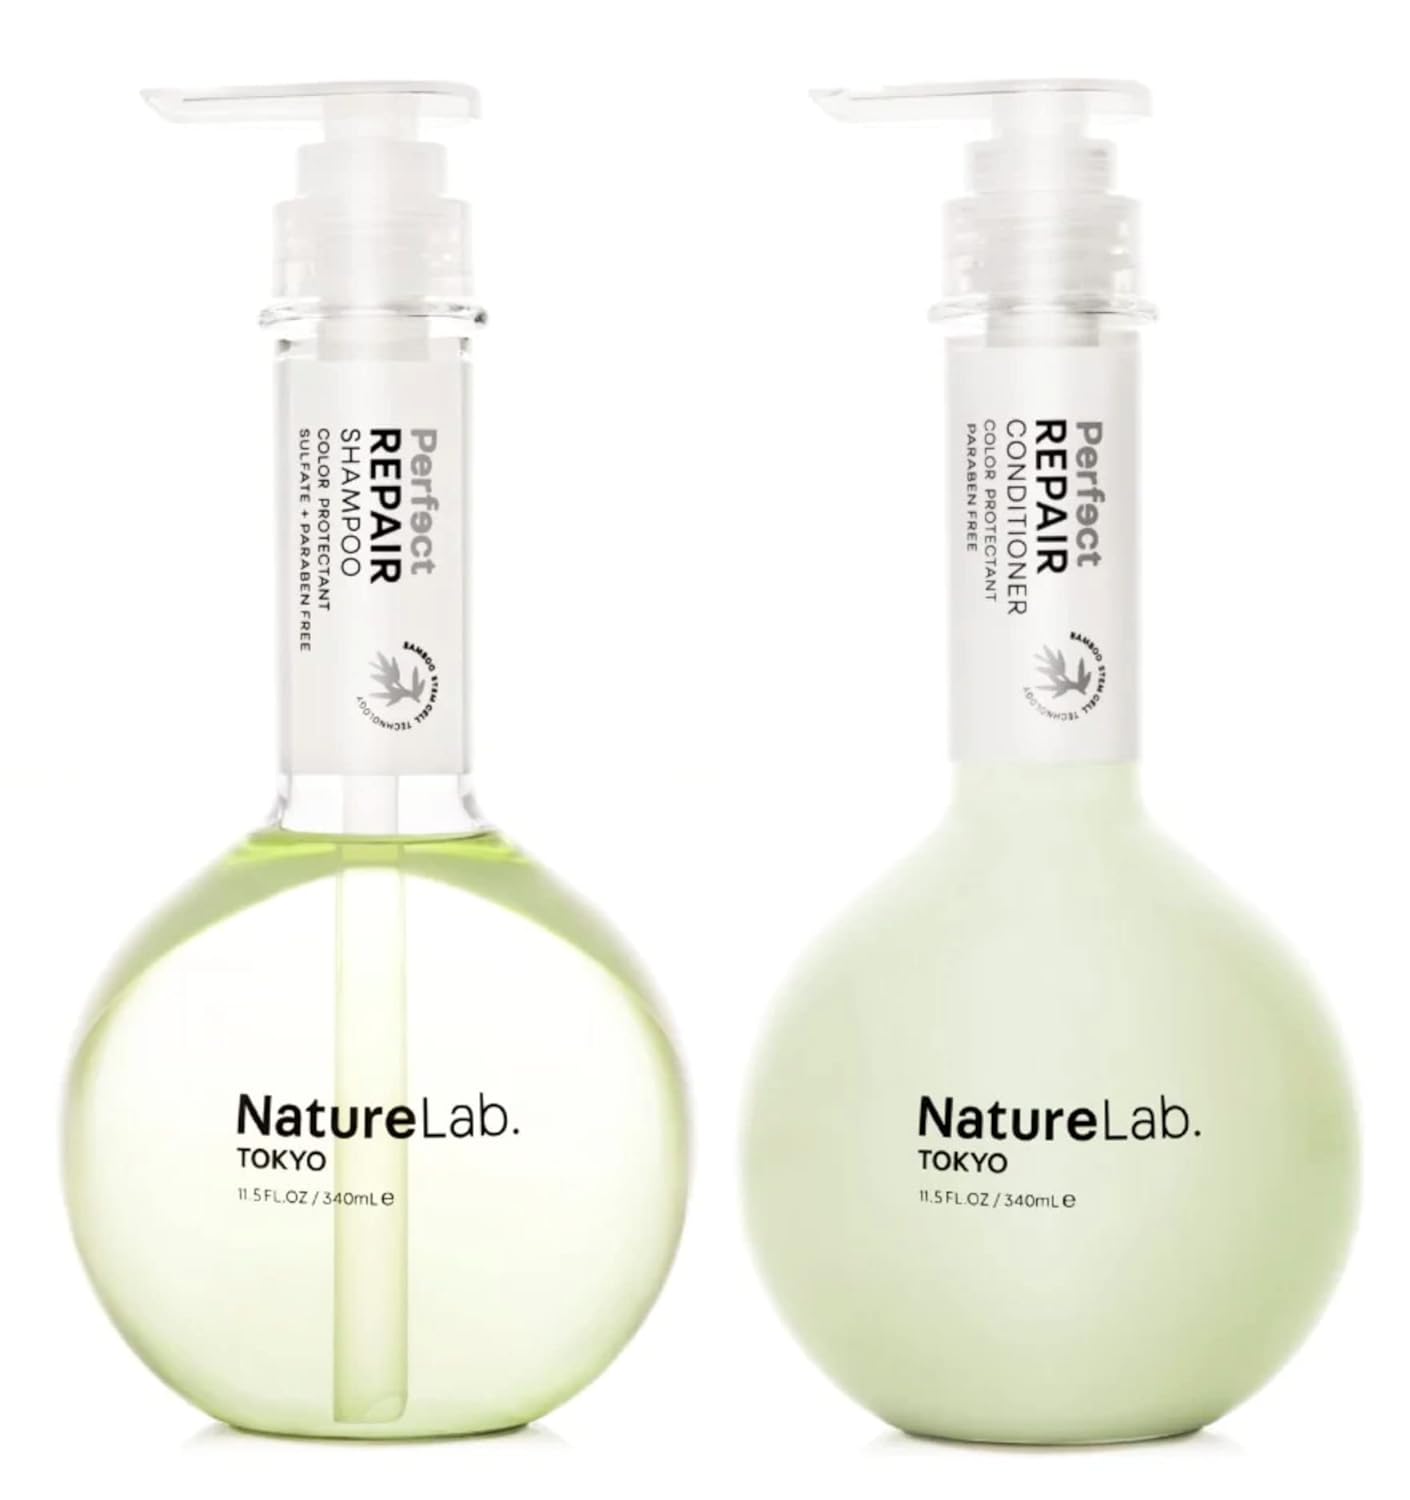 NatureLab TOKYO Perfect Repair Shampoo & Conditioner Duo: Replenish and Restore Damaged, Color Treated Hair and Strengthen New Hair I 11.5   Each | $30 VALUE